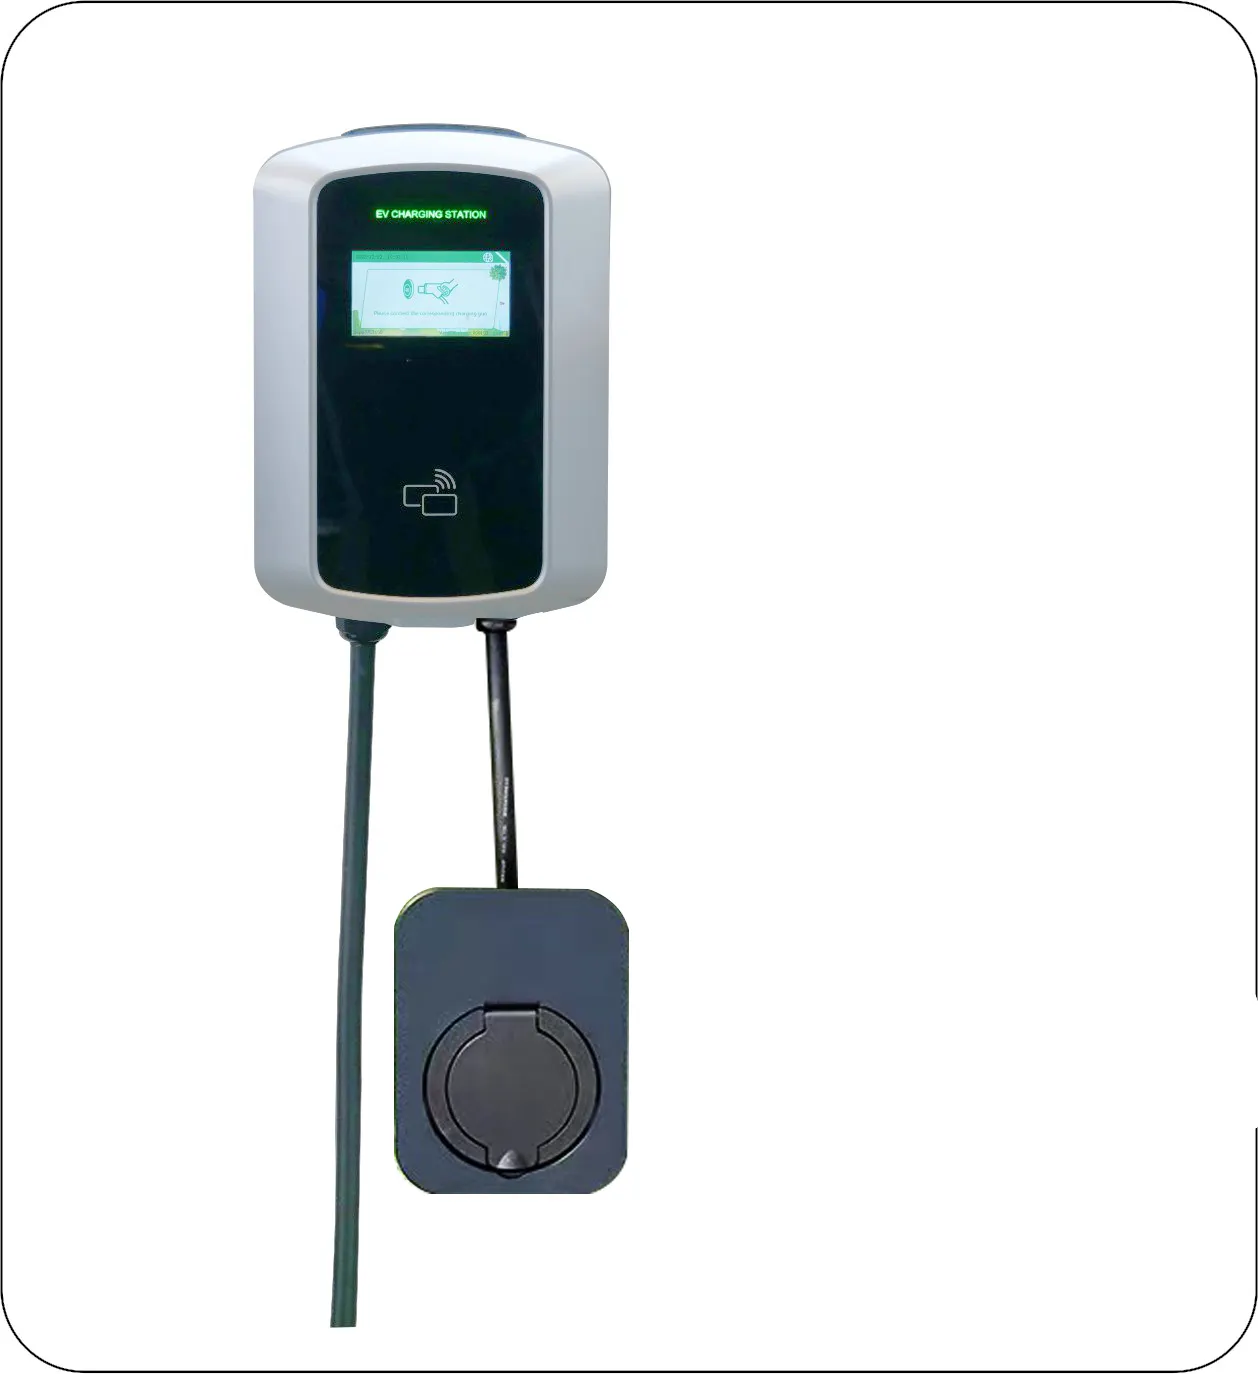 11kw/22kw GB/T T2S socket AC mode 3 level 2 wallbox EV Charger evse electric car charger